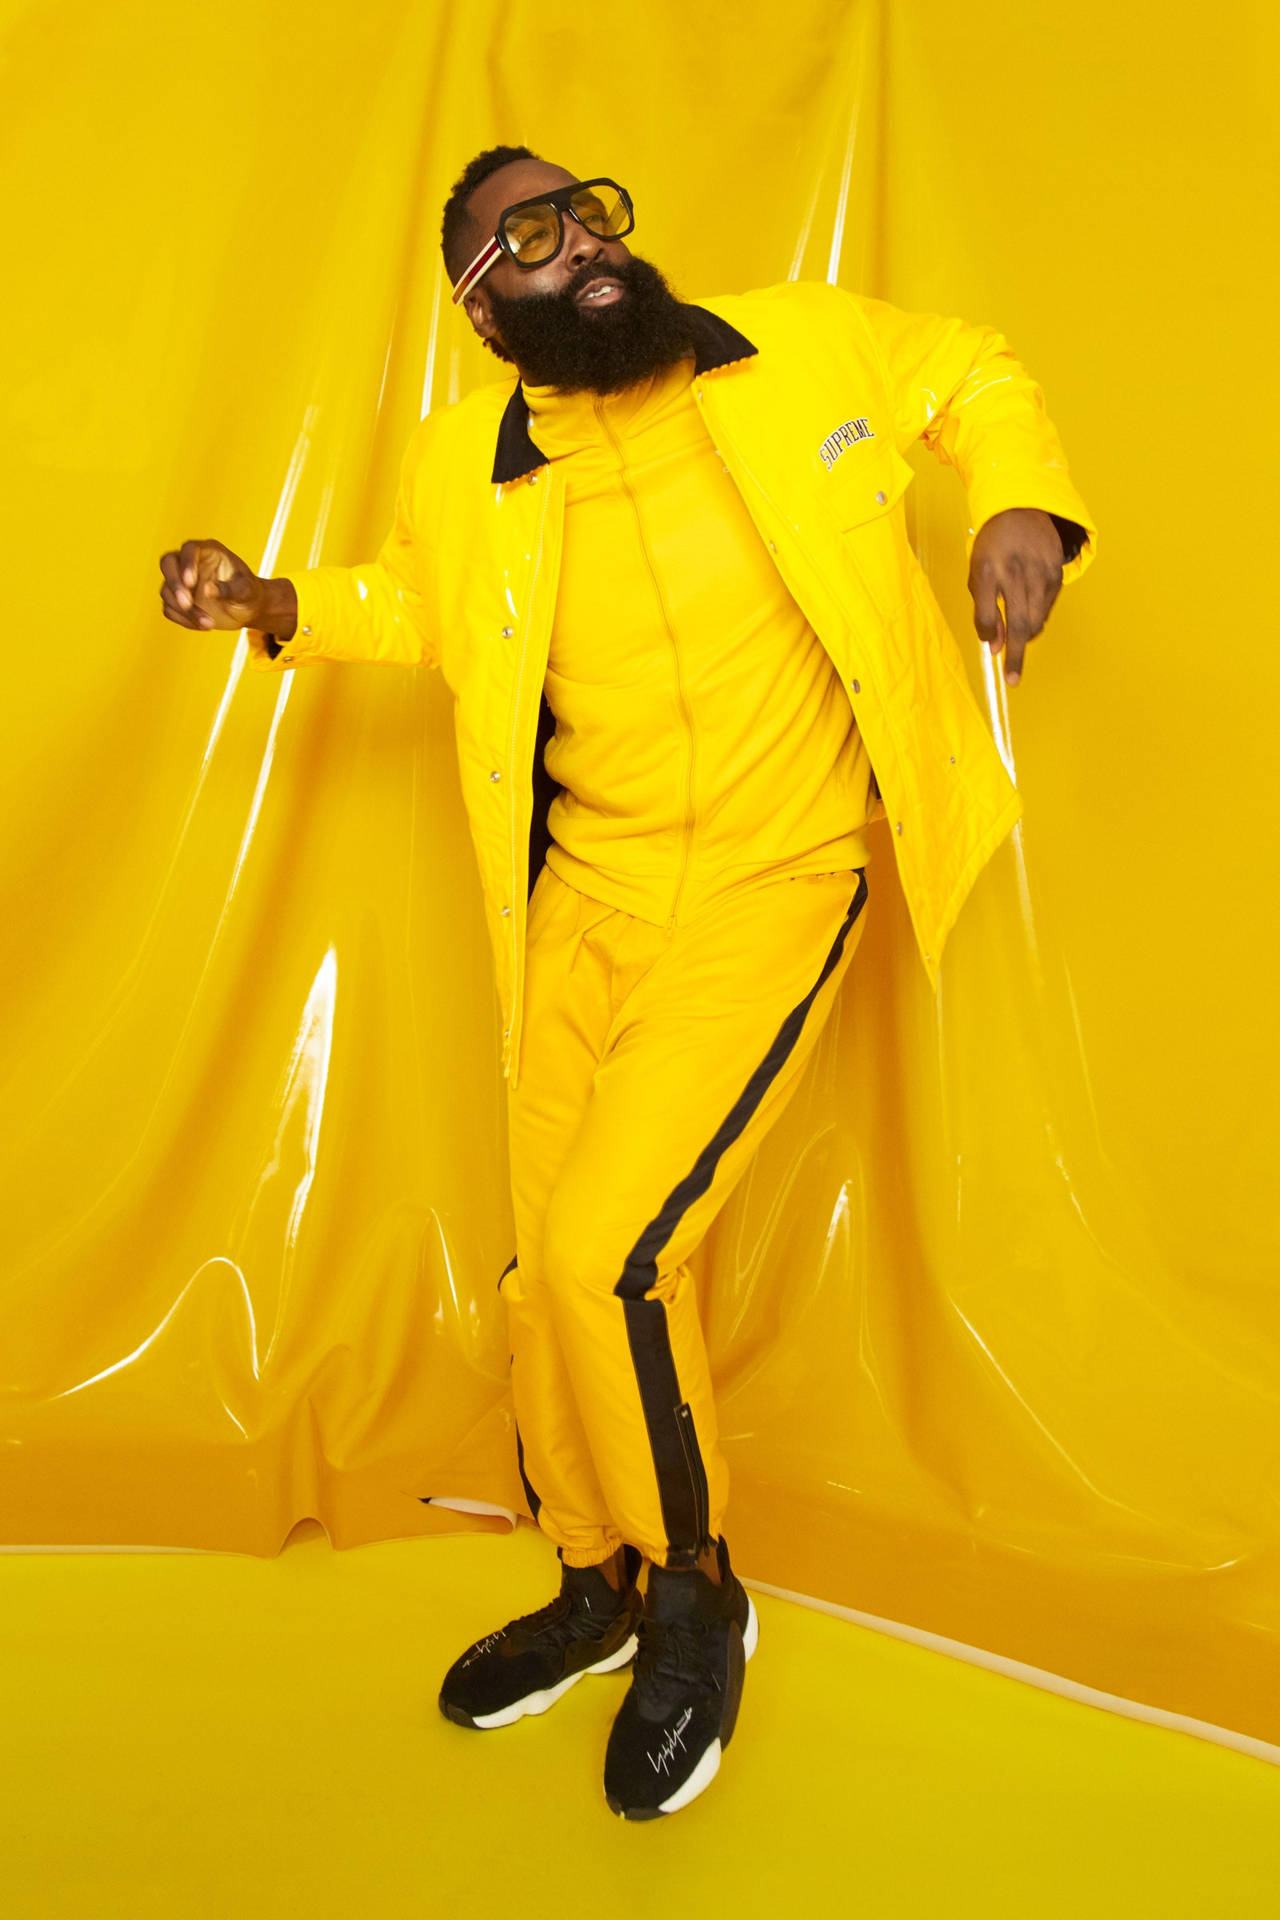 James Harden Dancing In Yellow Outfit Wallpaper